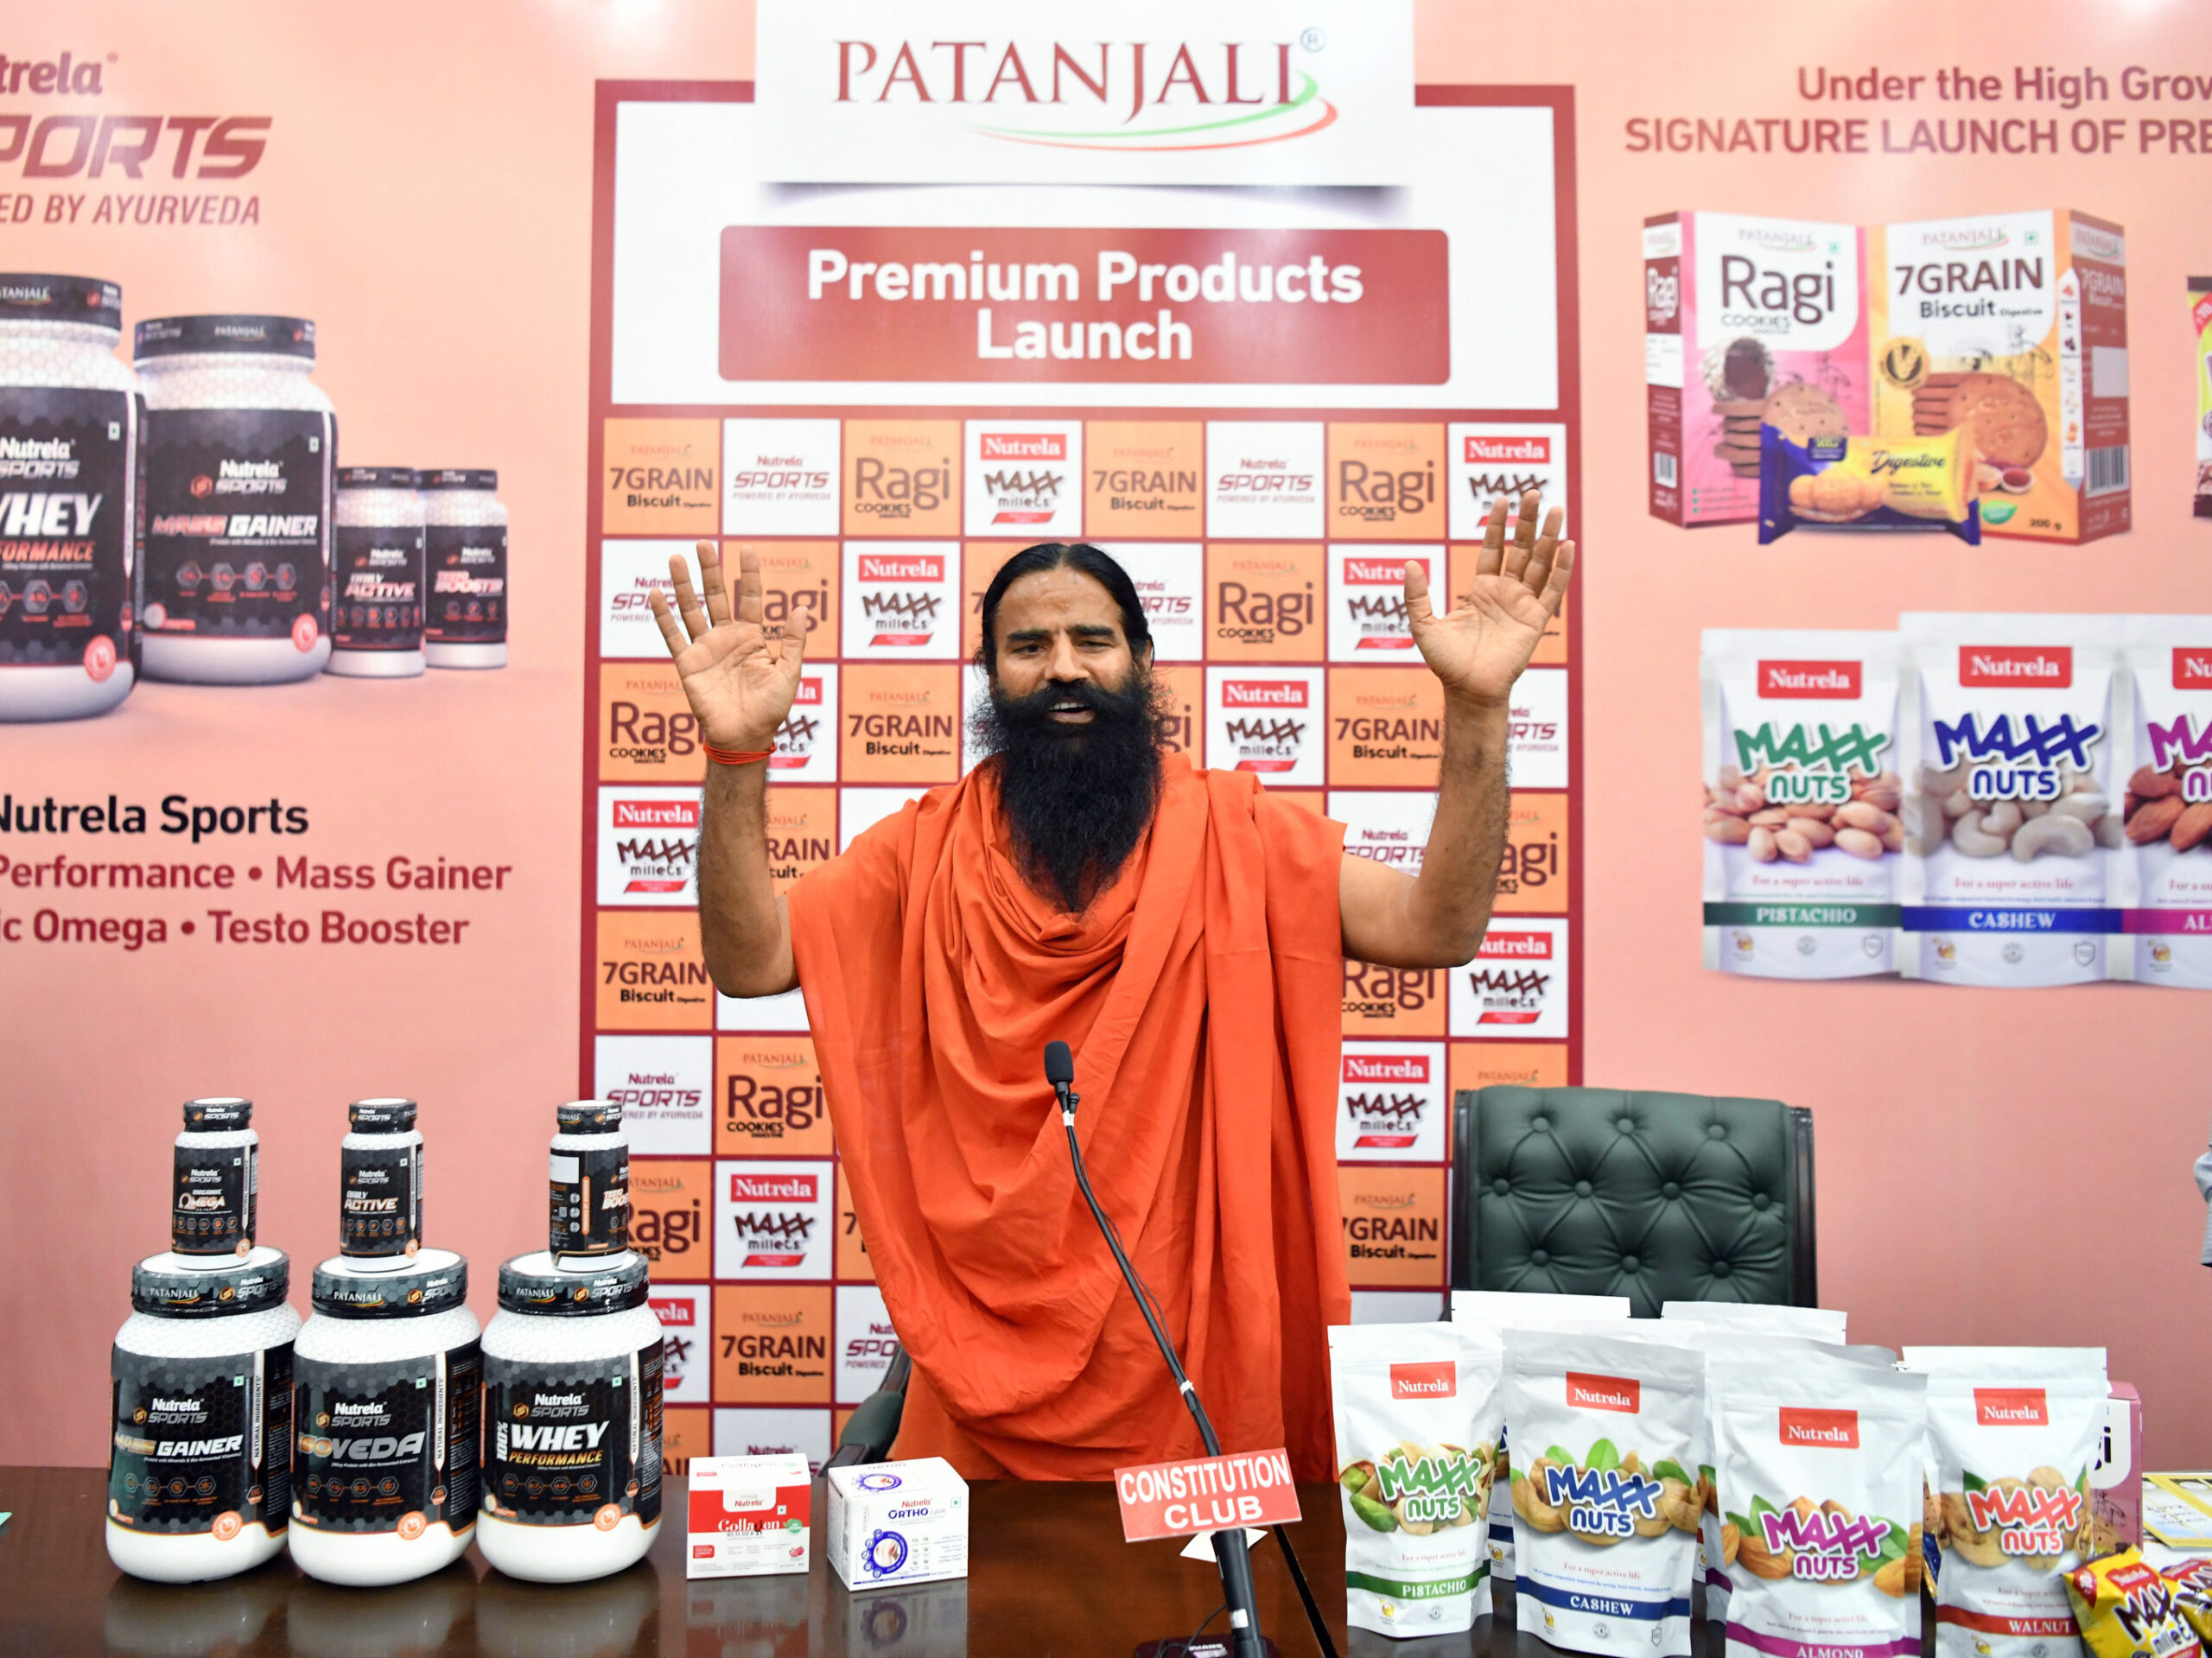 Indian judge says billion-dollar ayurvedic company has taken the public ‘for a ride’